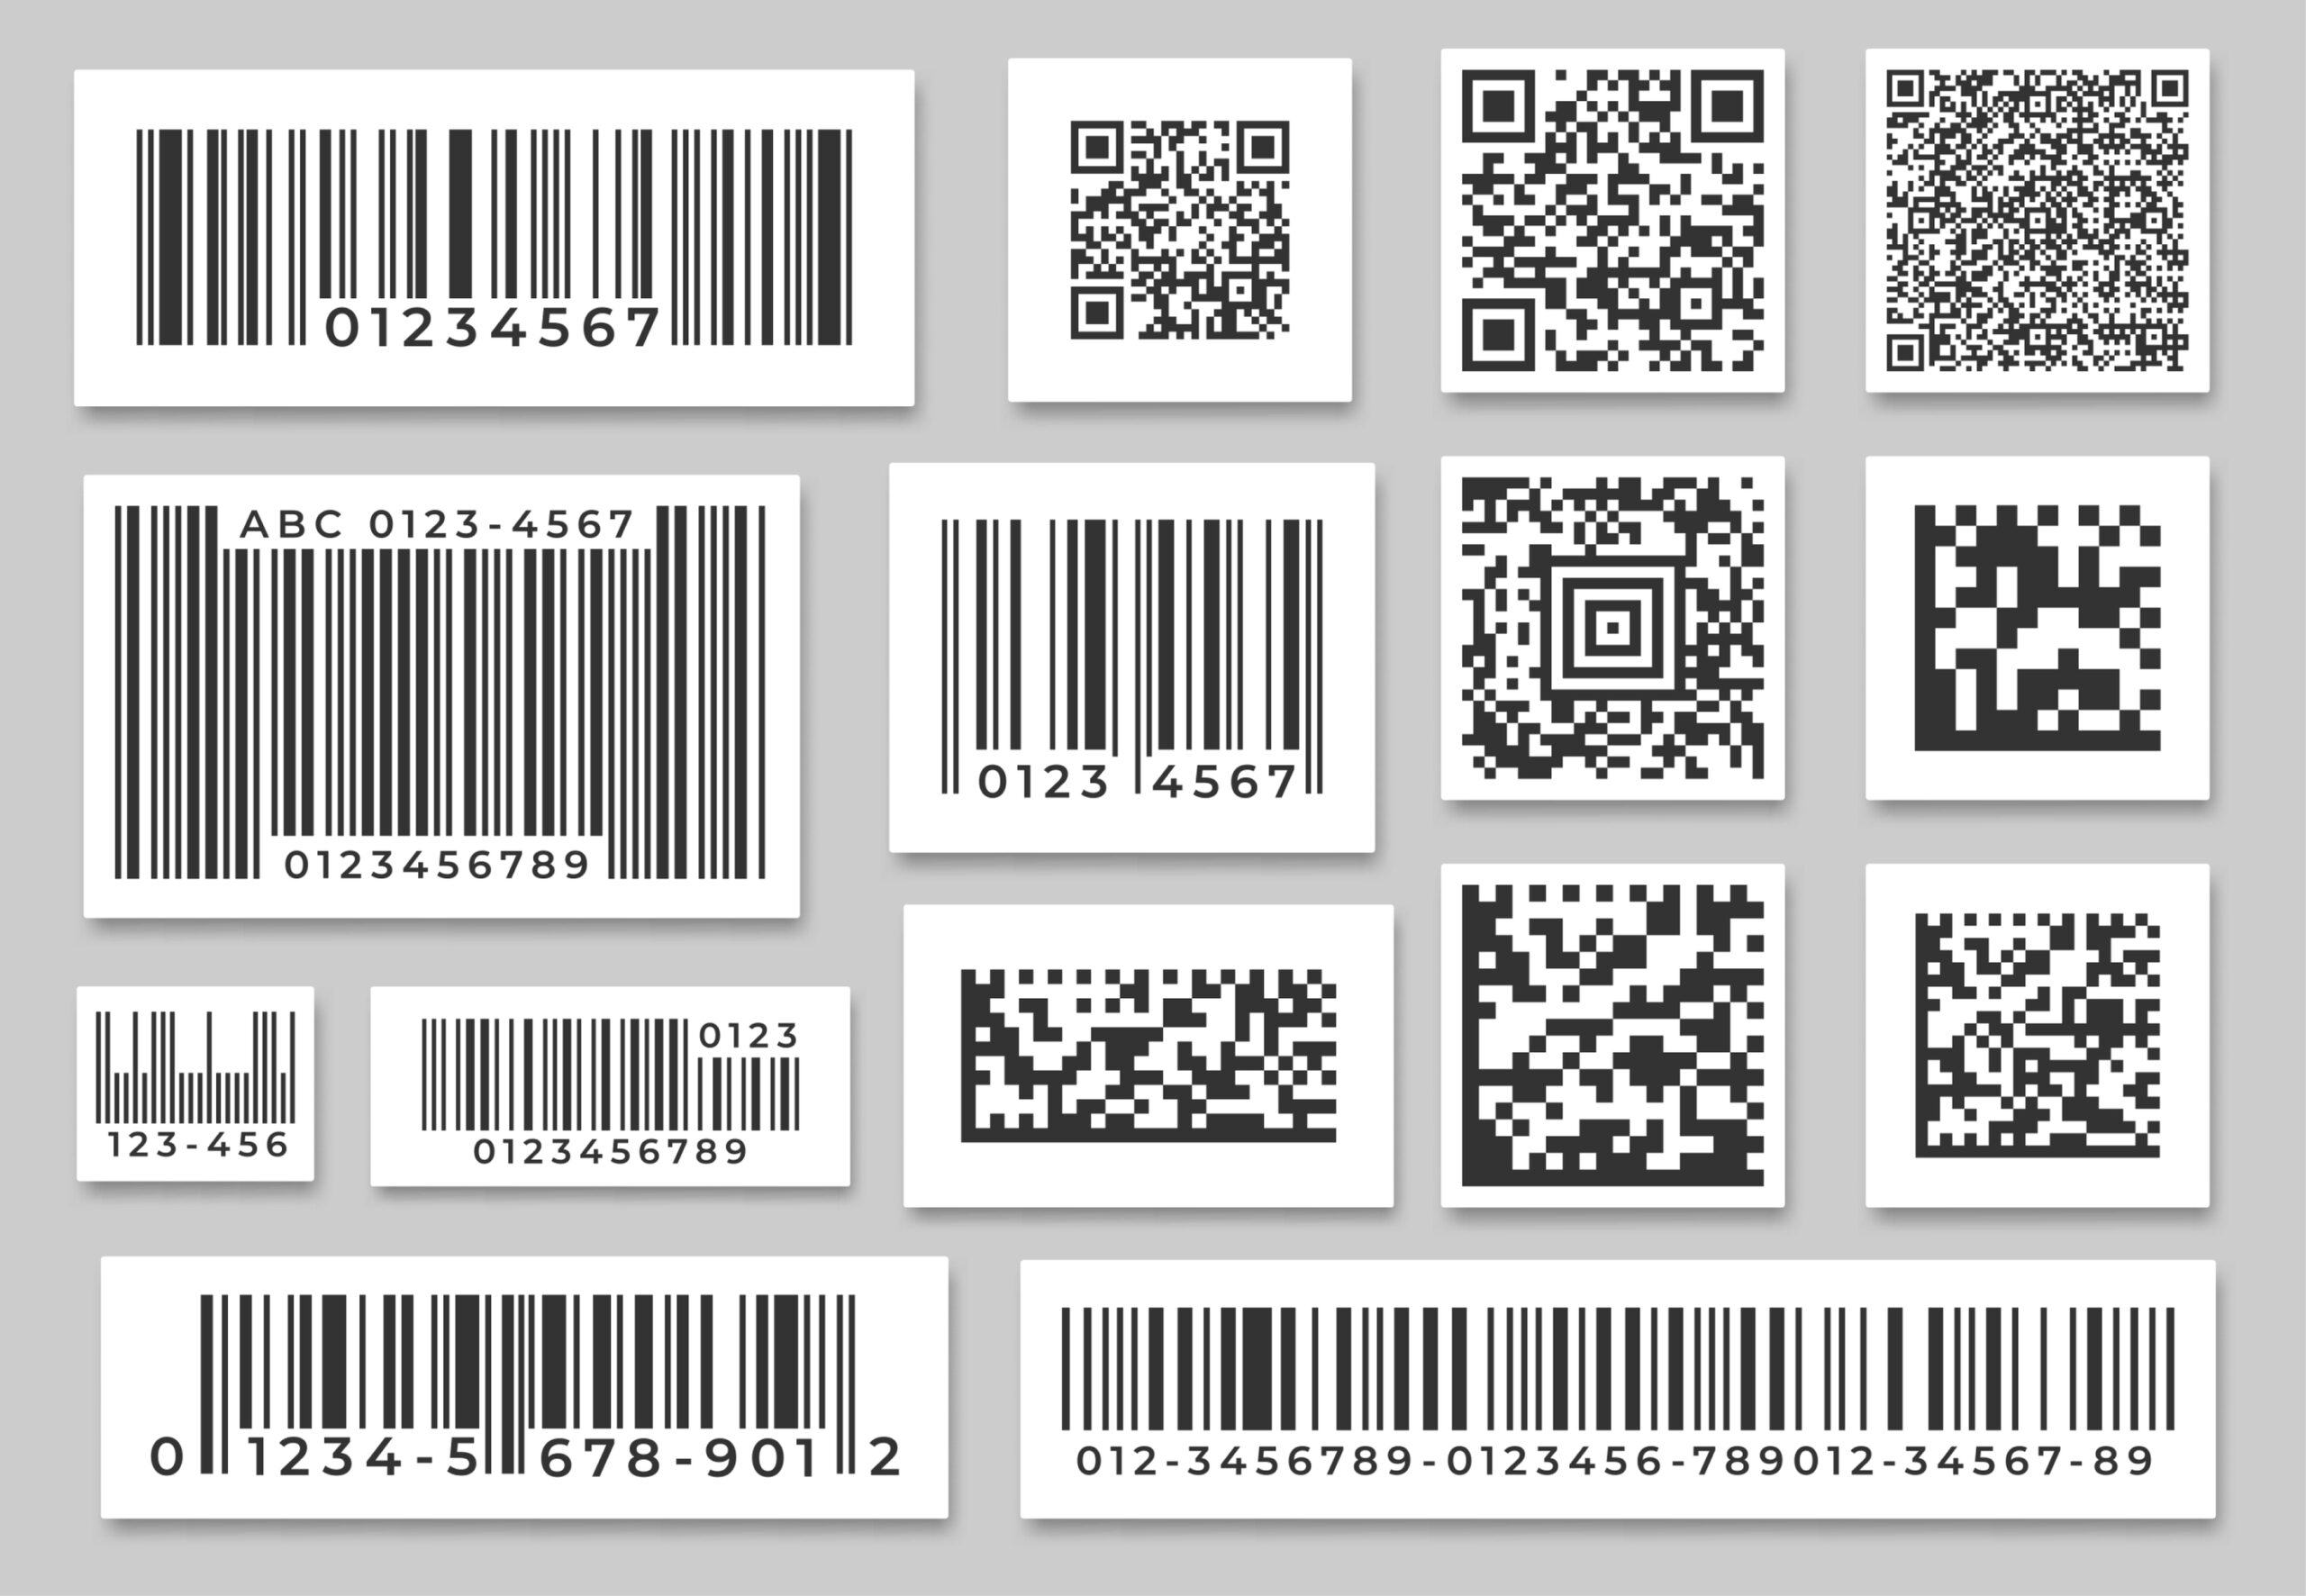 QR Code Scanner with Bar Code Scanner Support